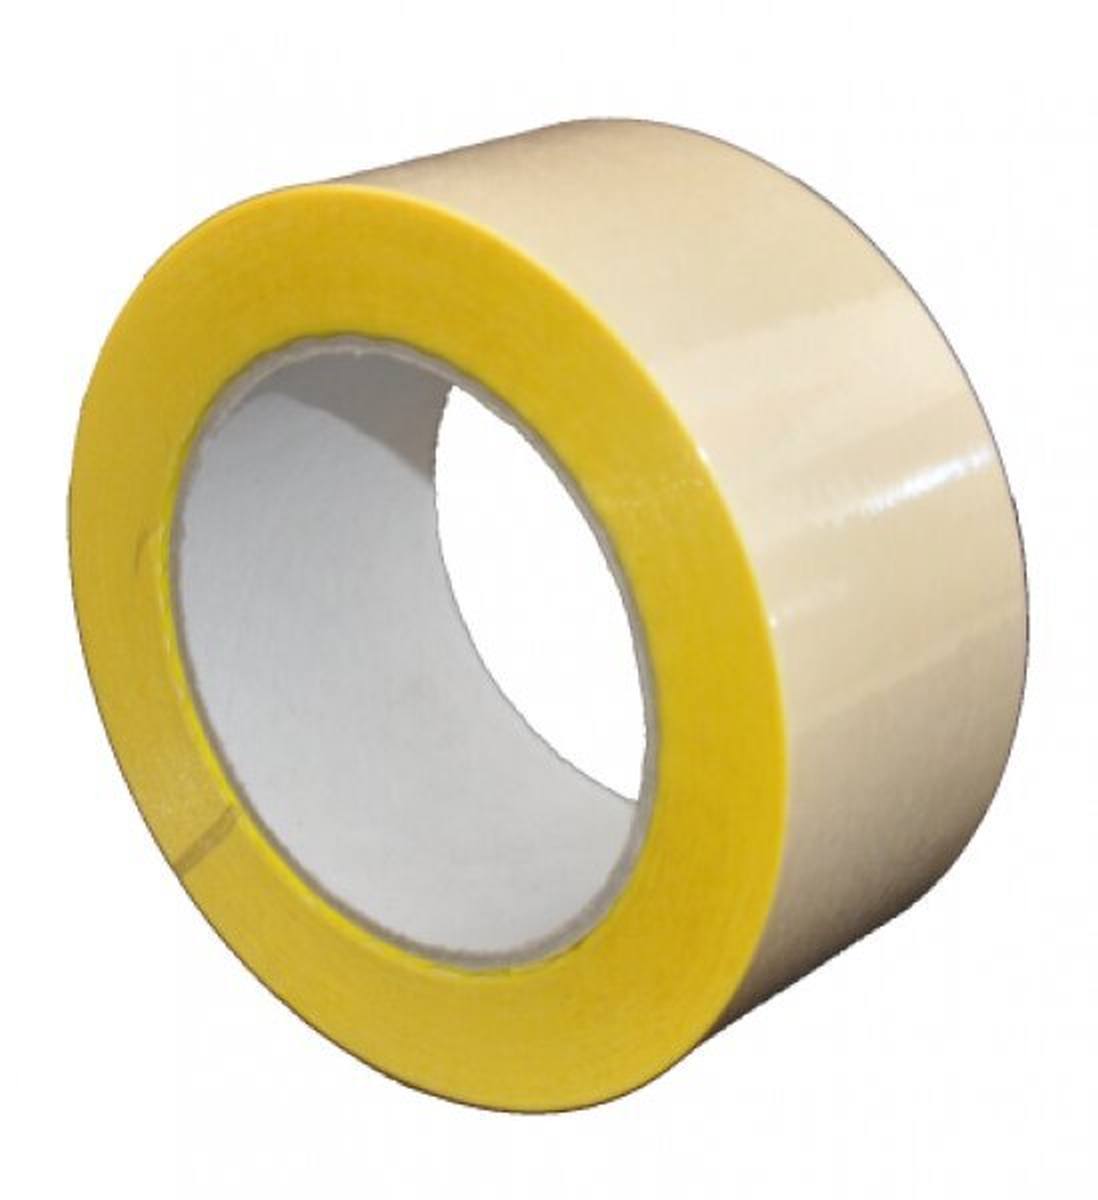 S-K-S 407 Double-sided adhesive tape with polypropylene backing, high / low tack, yellow, 450 mm x 50 m, 0.15 mm